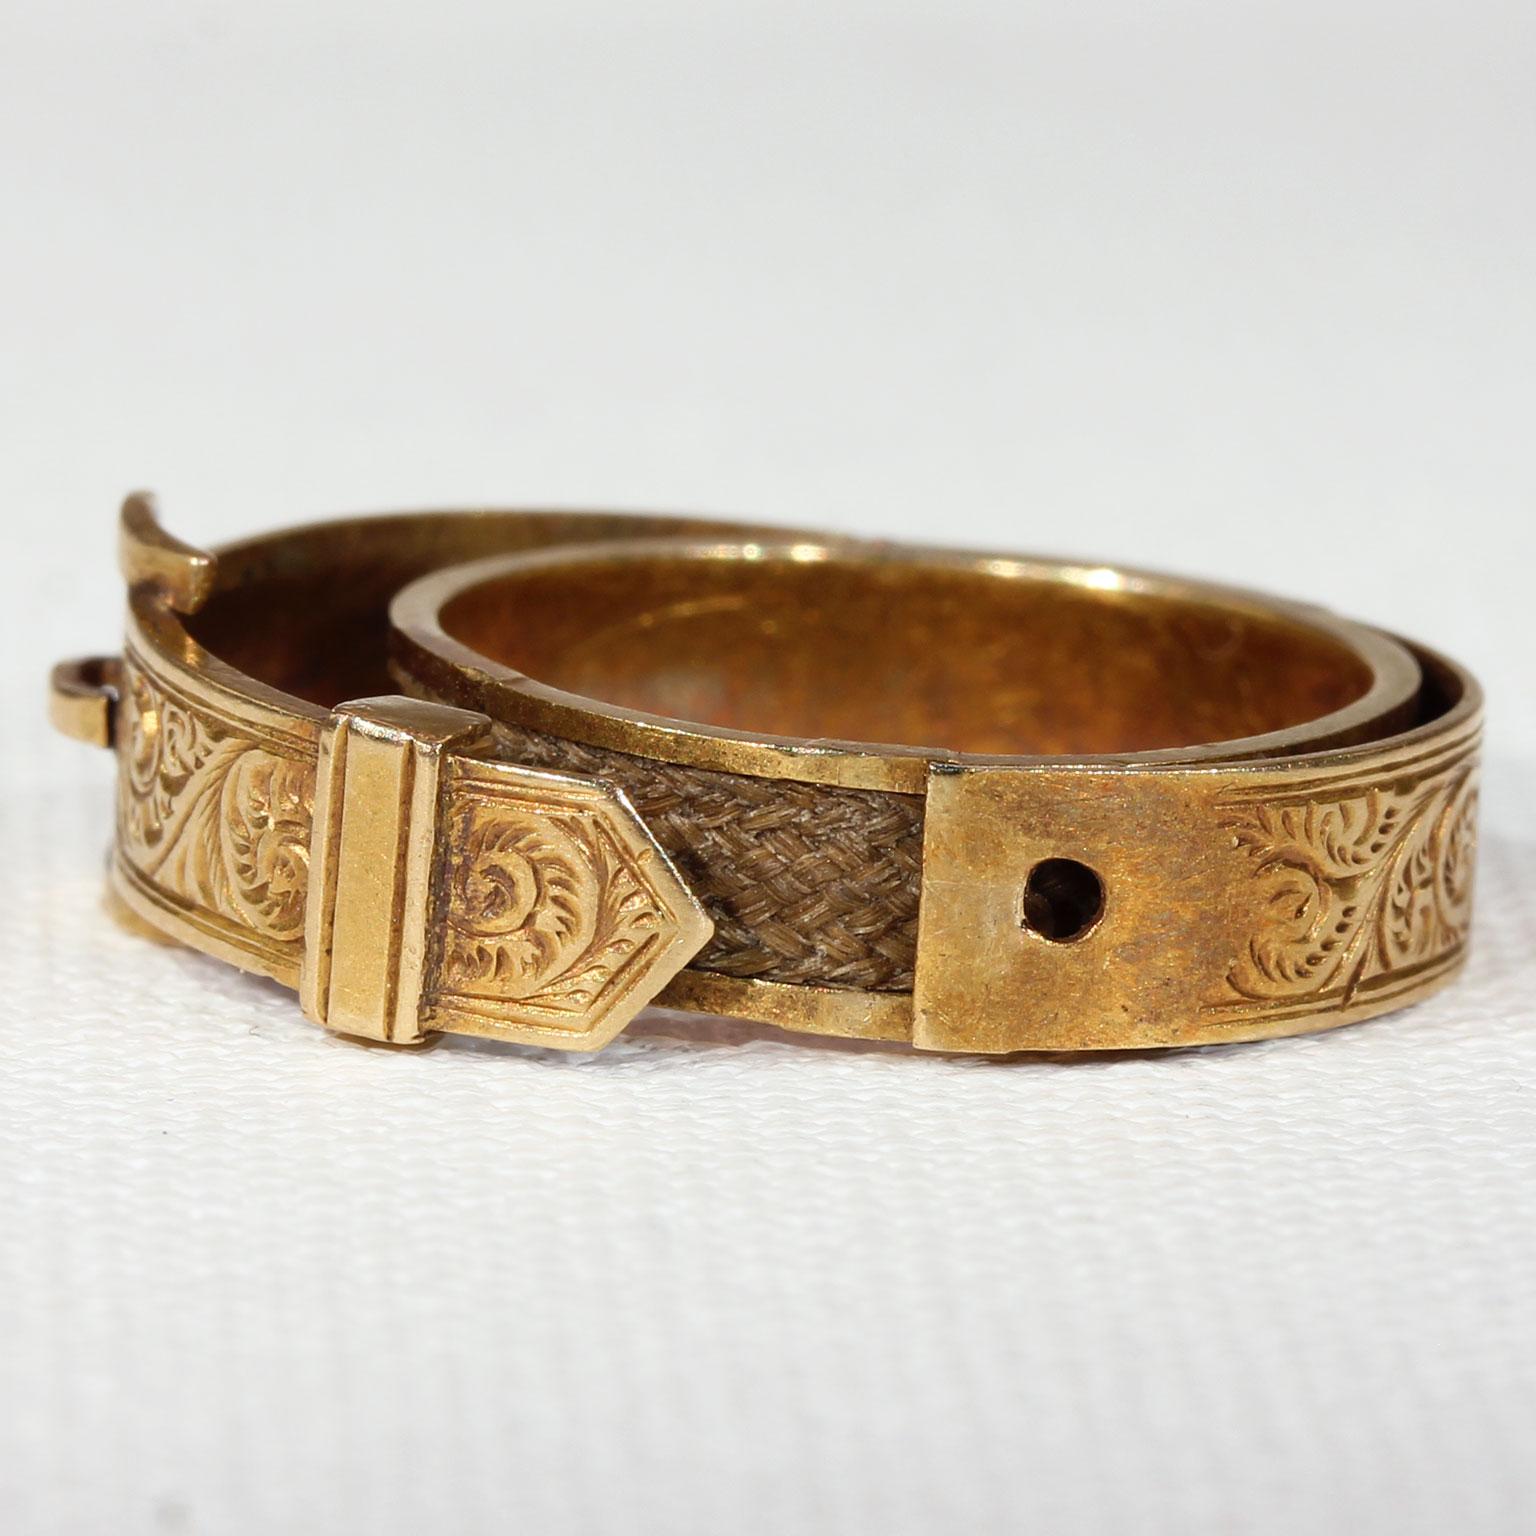 Gold Victorian Opening Buckle Ring Hair Memorial